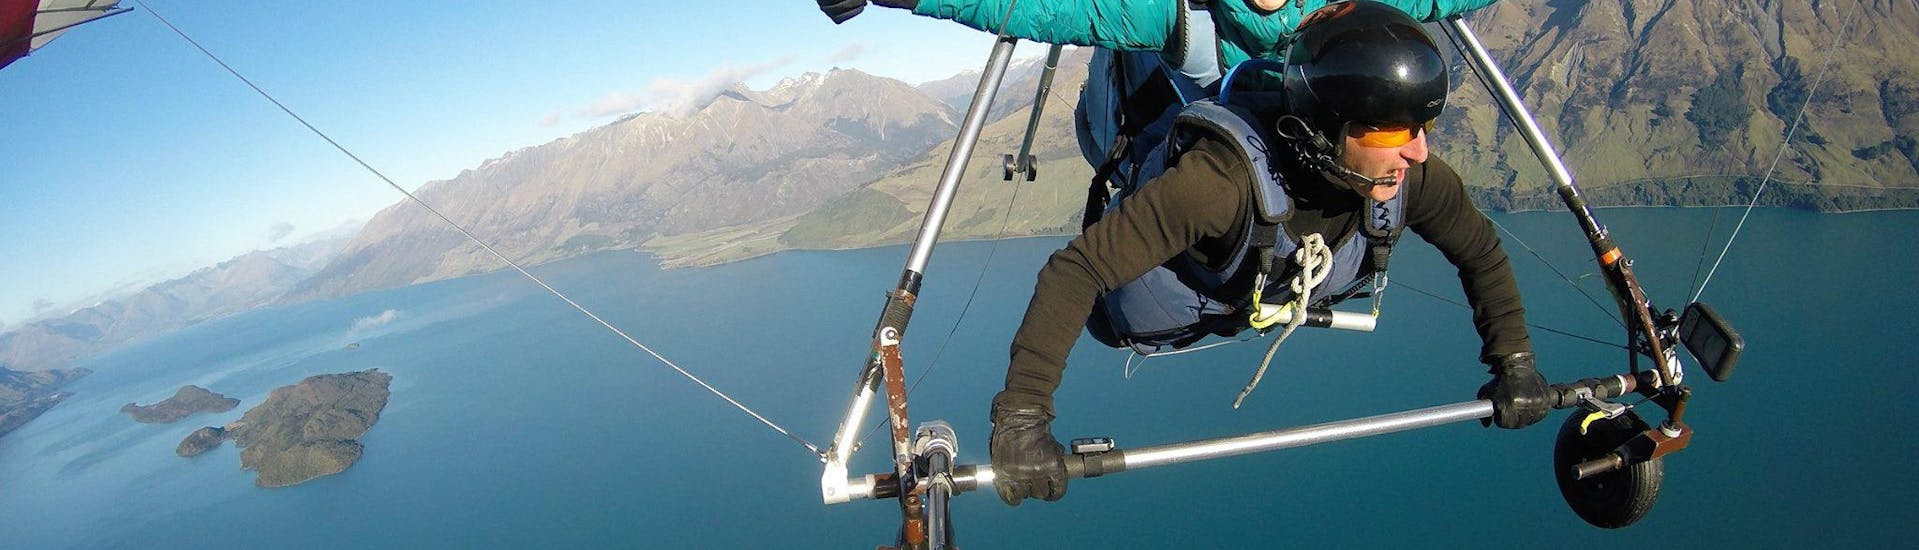 A hang gliding passenger is seemingly enjoying herself while Aerotow Hang Gliding in Queenstown with Skytrek Queenstown.